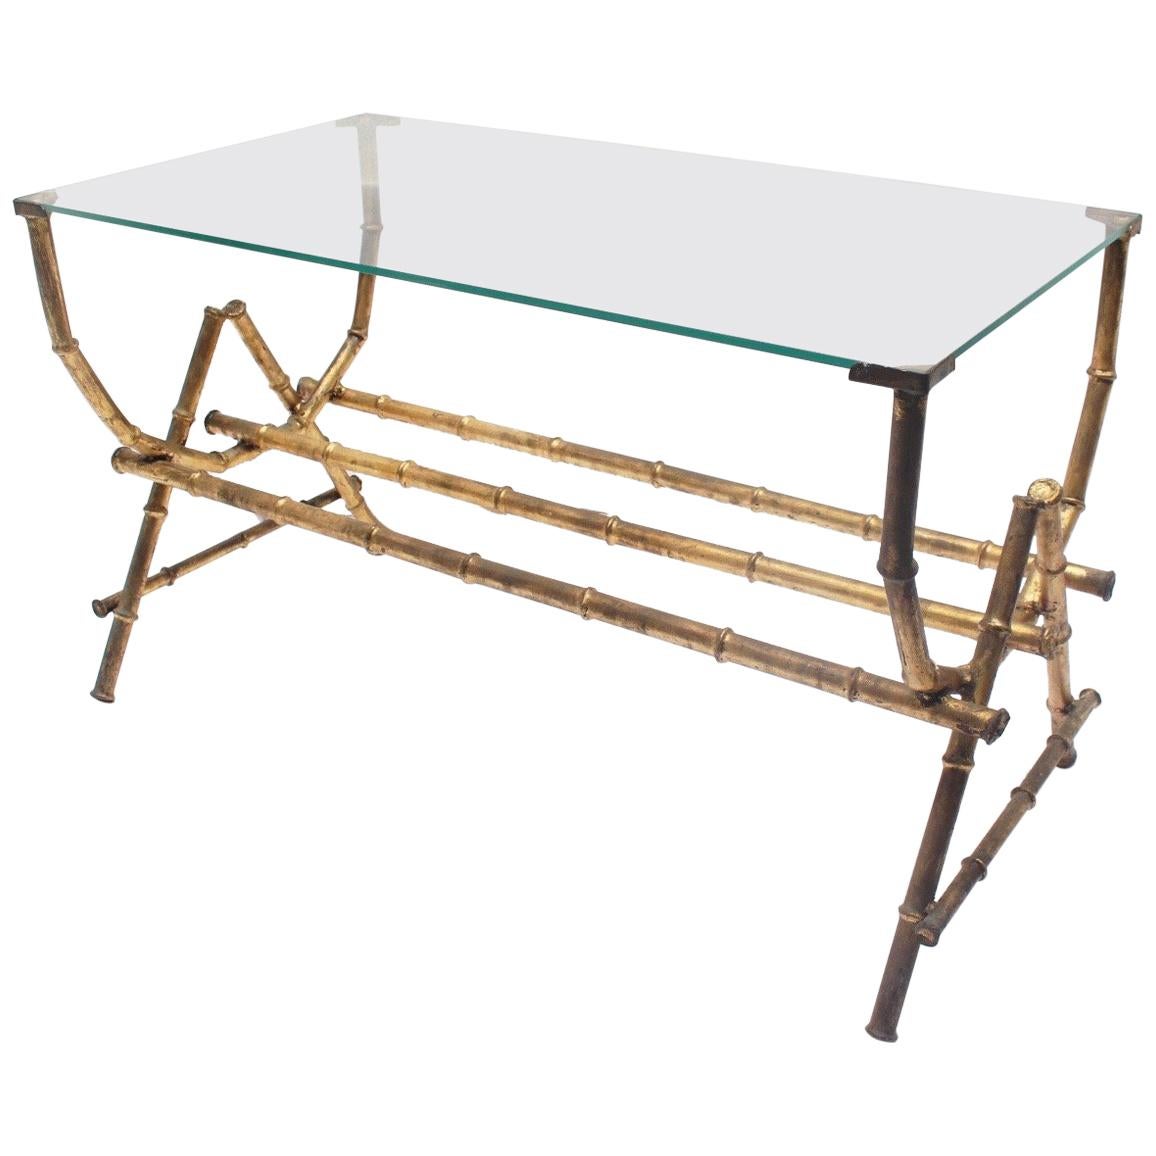 Midcentury Faux Bamboo Gilt Iron and Glass Coffee Side Table, Spain, 1950s For Sale